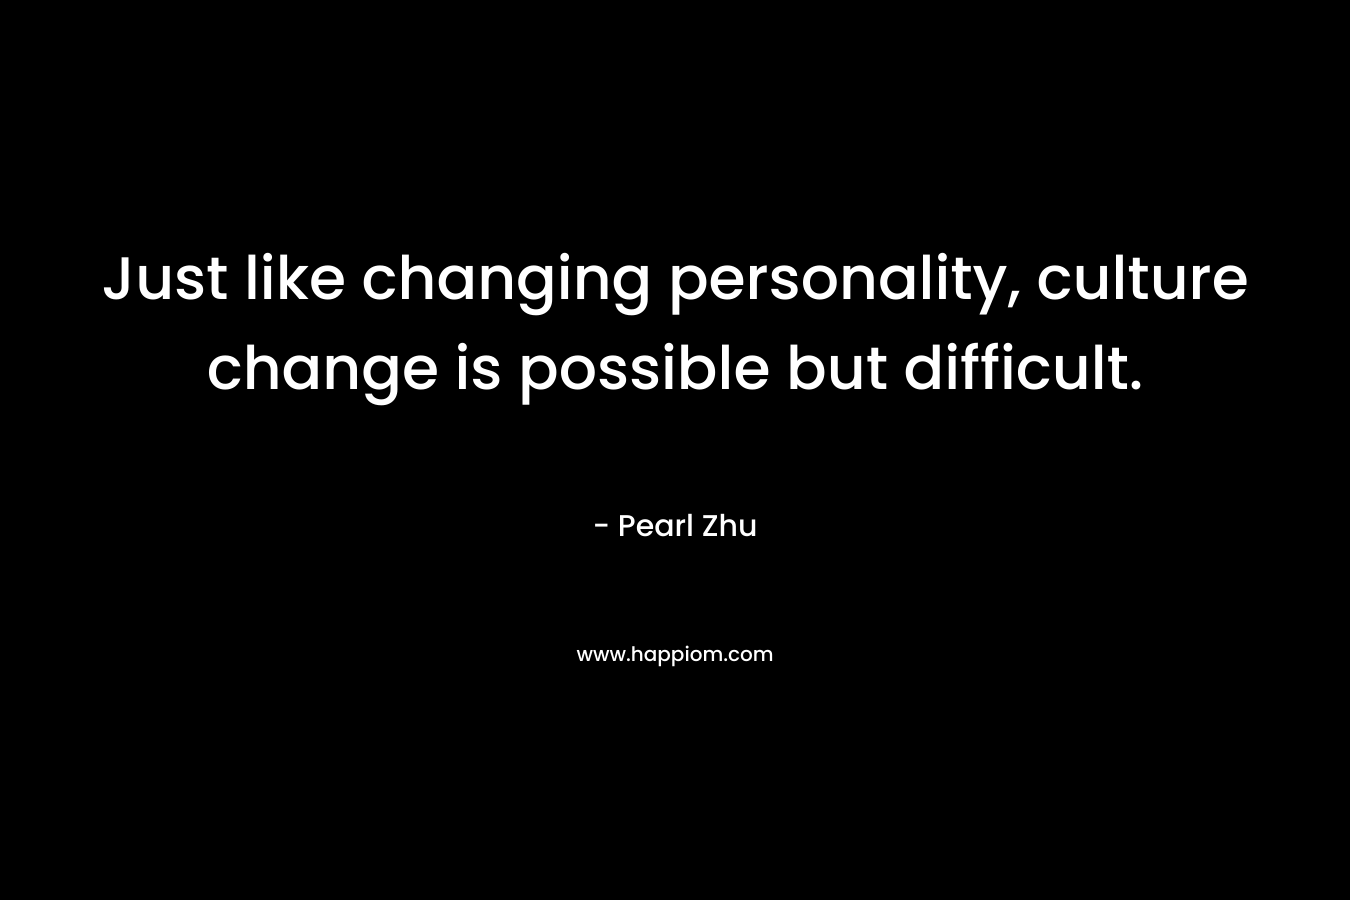 Just like changing personality, culture change is possible but difficult.